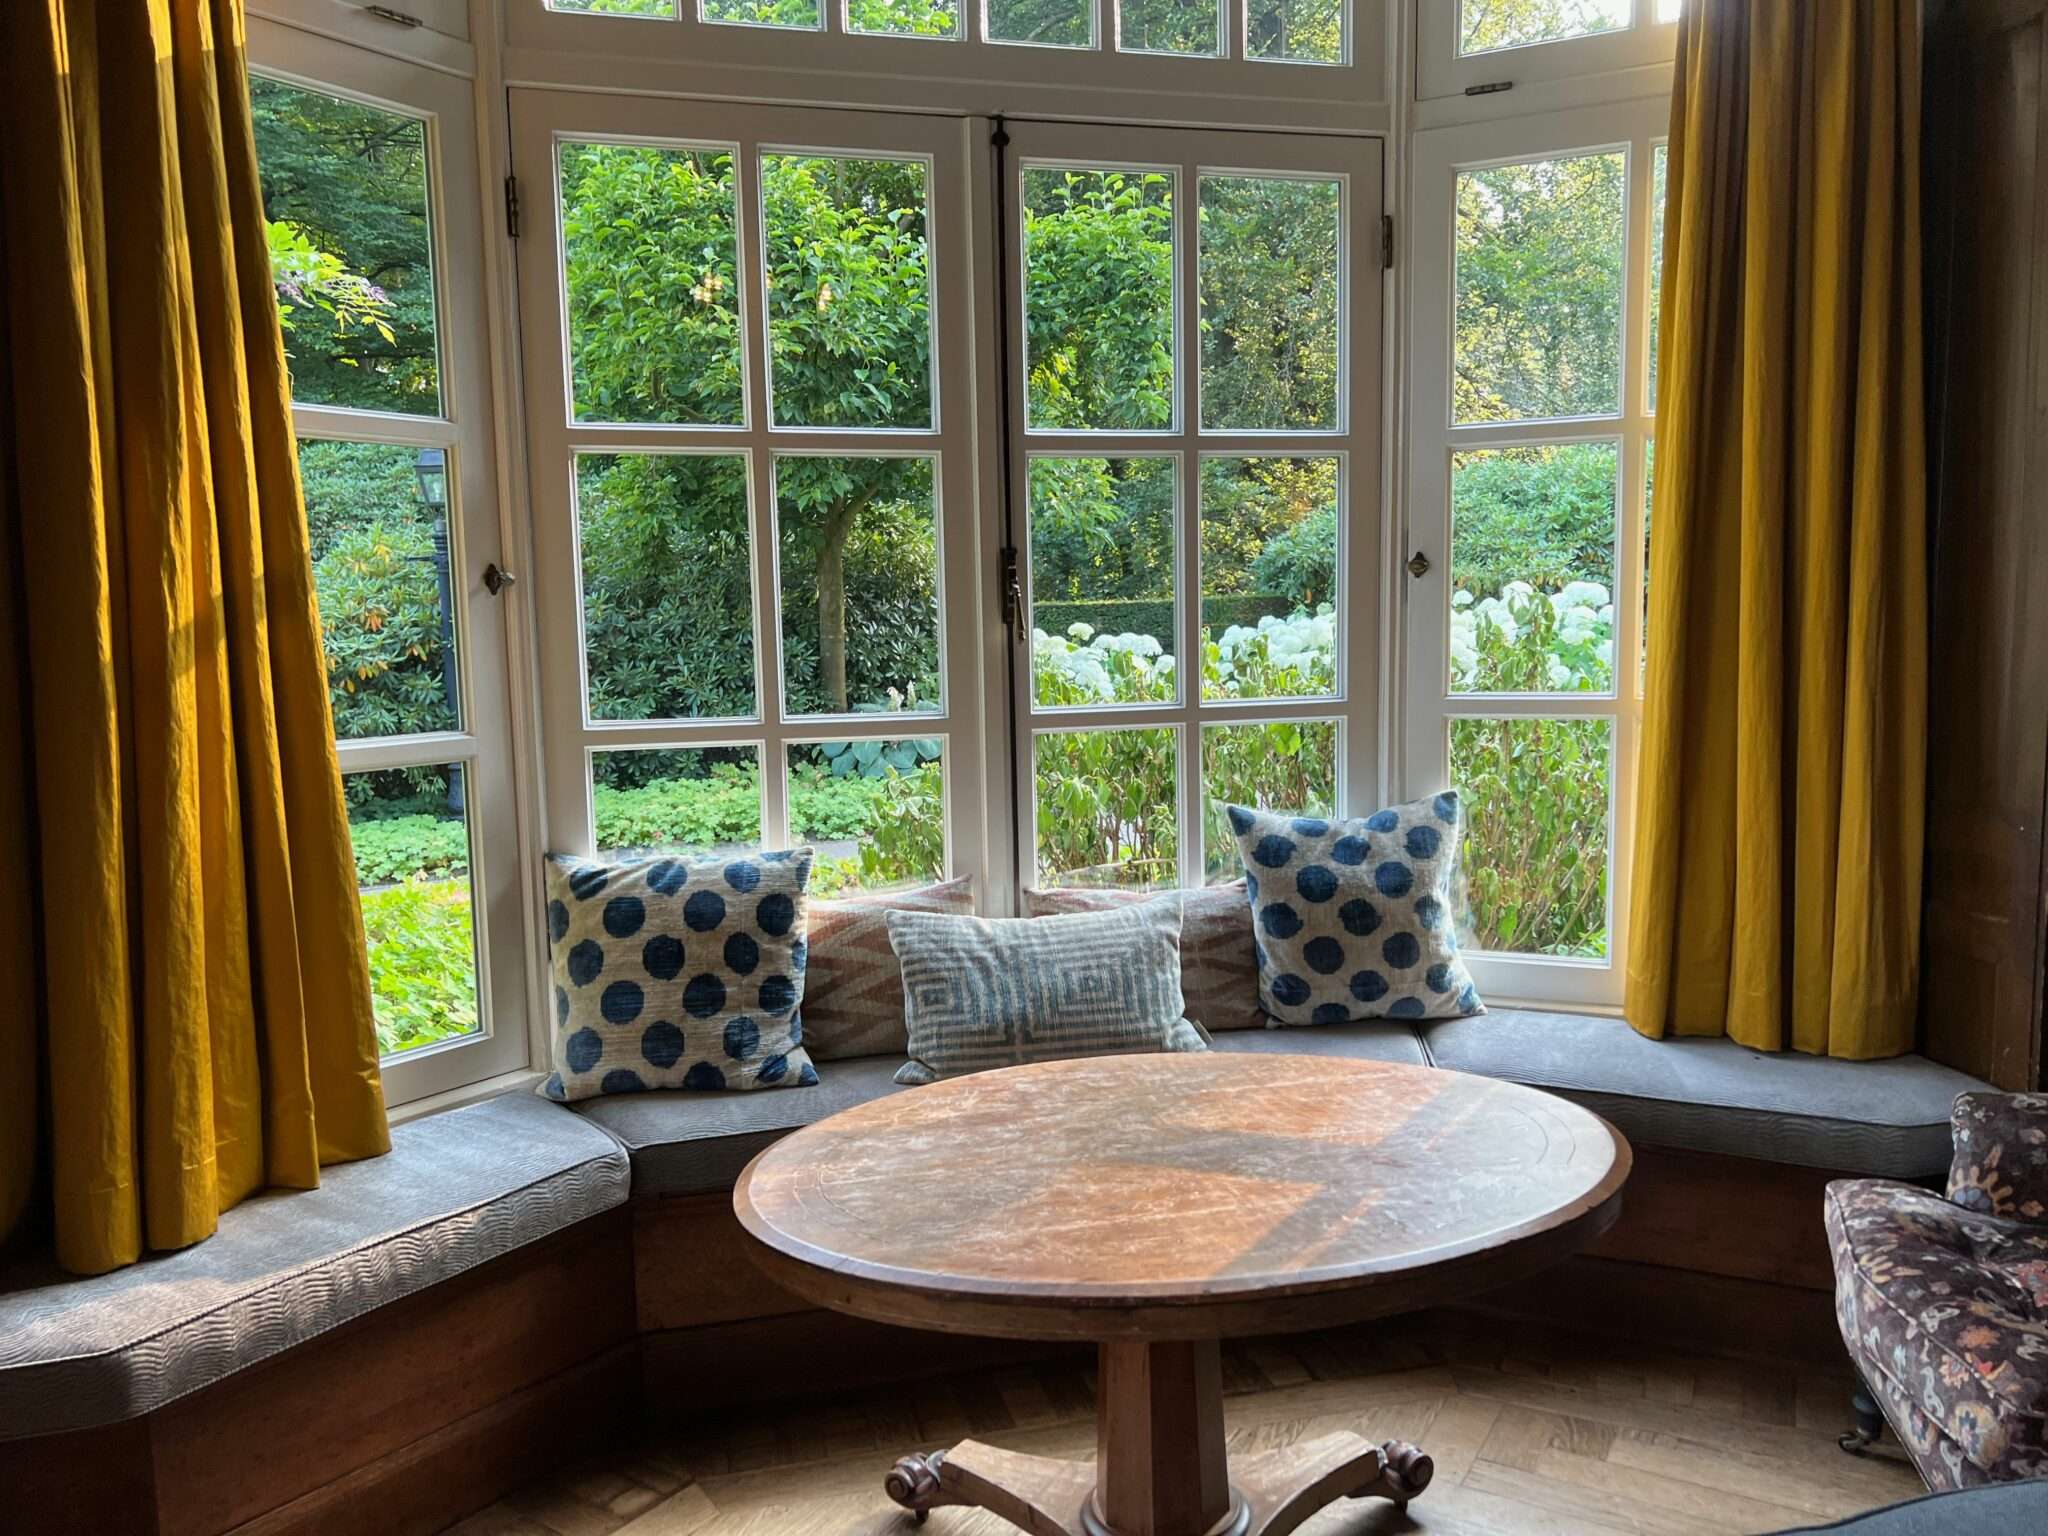 Bay window with seat and trees outside